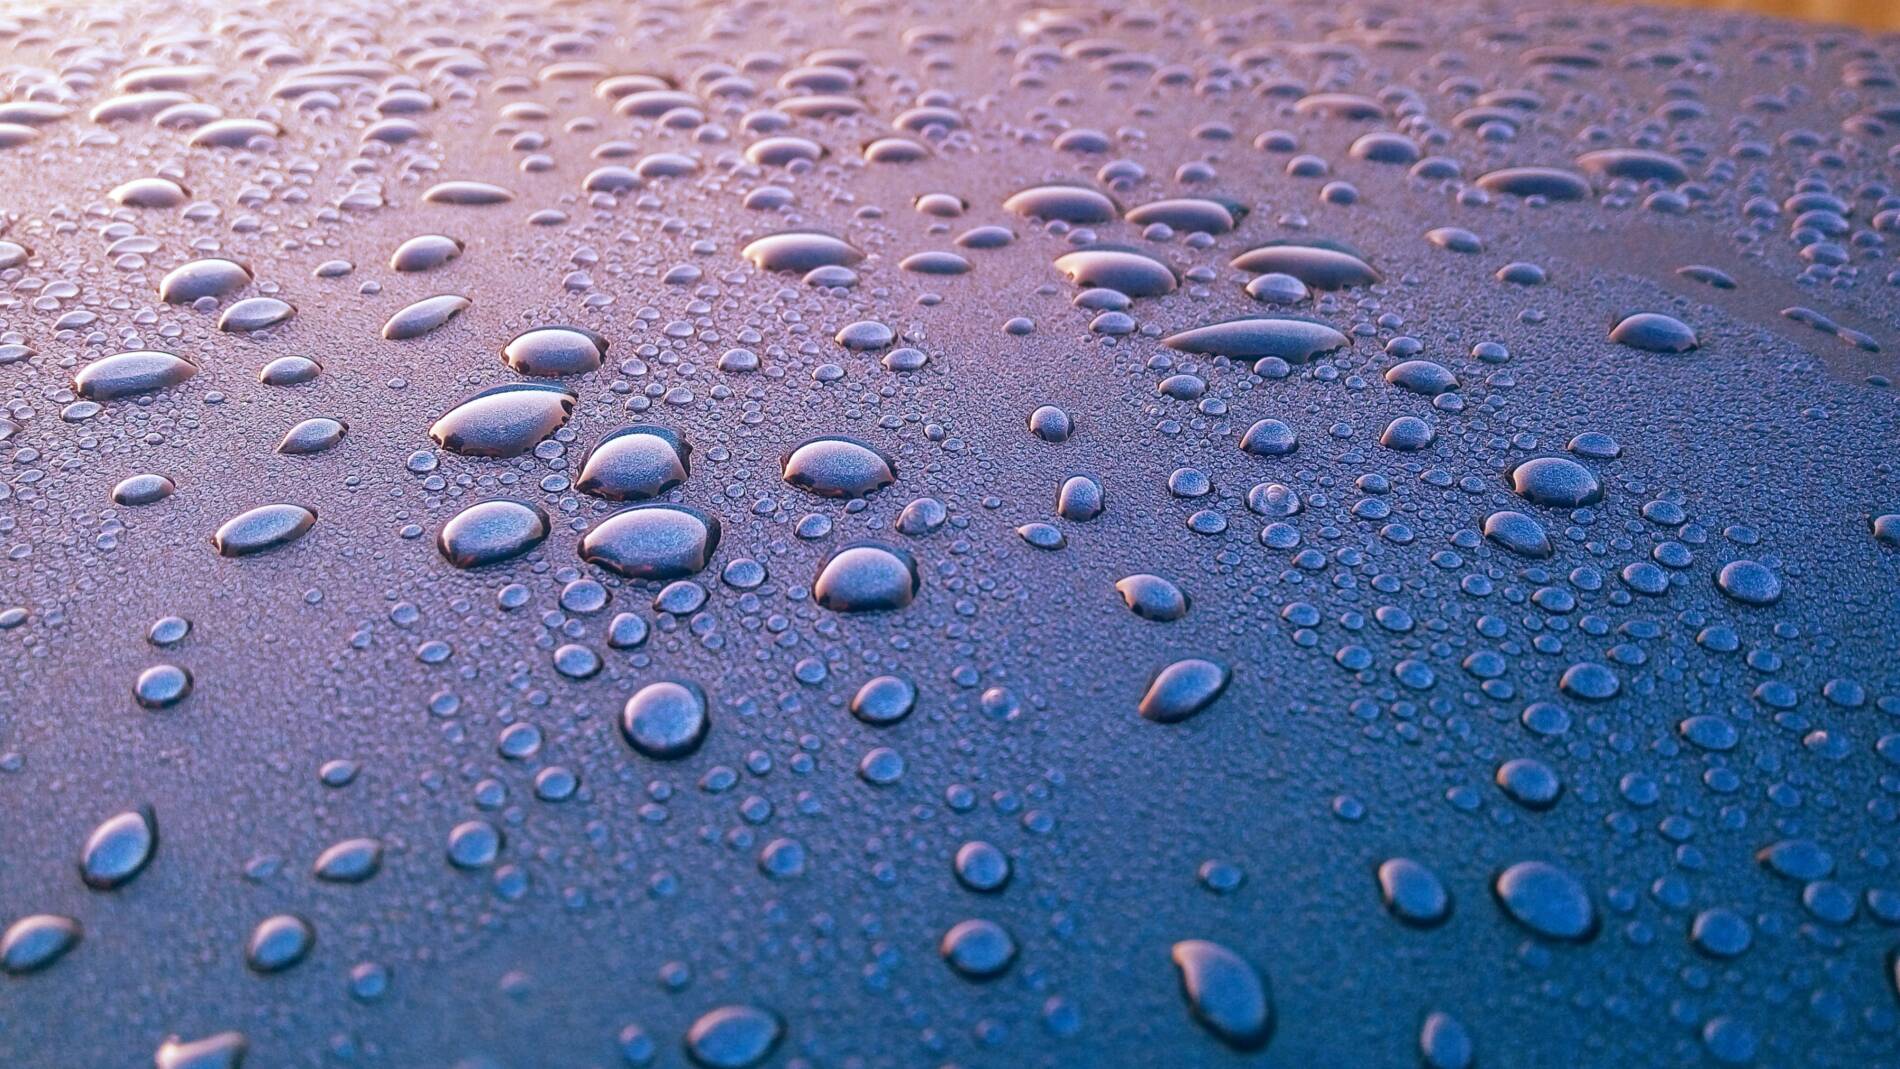 A stock image of circular water droplets on a dark, purple-like ground